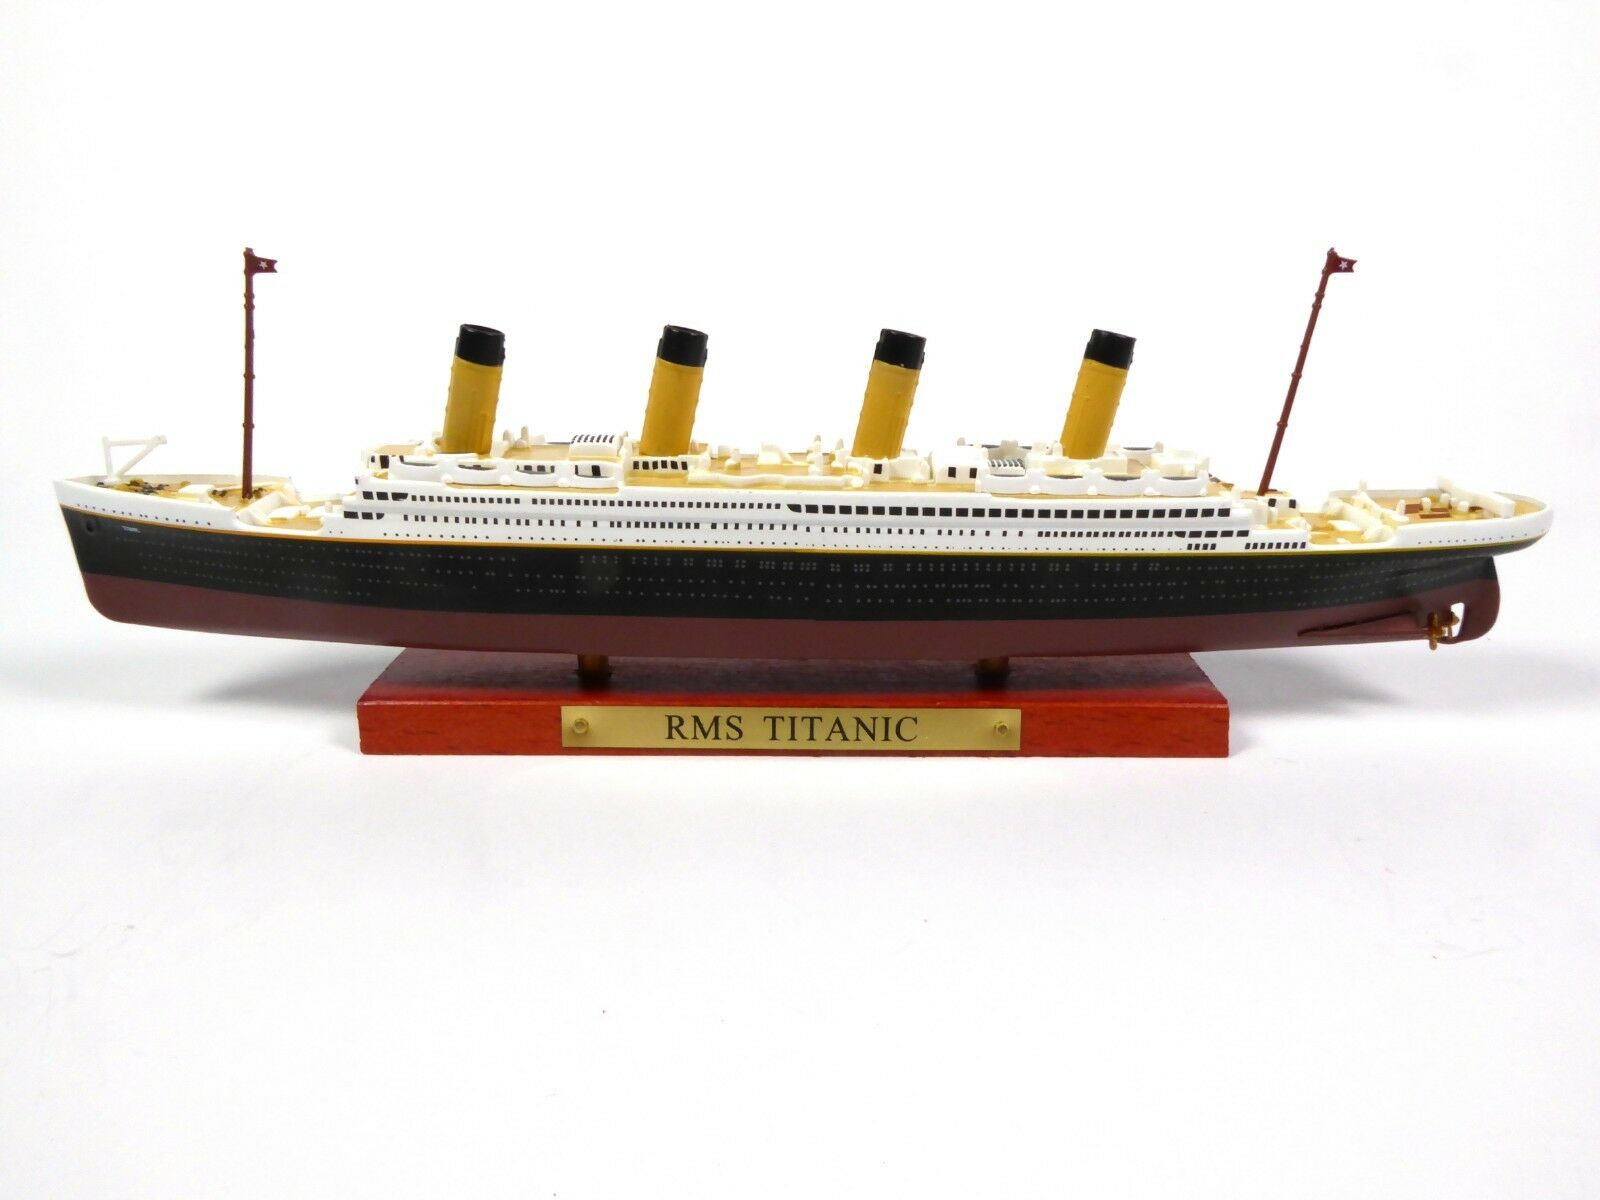 Atlas  R.M.S TITANIC Cruise Ship Model Collectiable 1:1250  Diecast Boat Toys